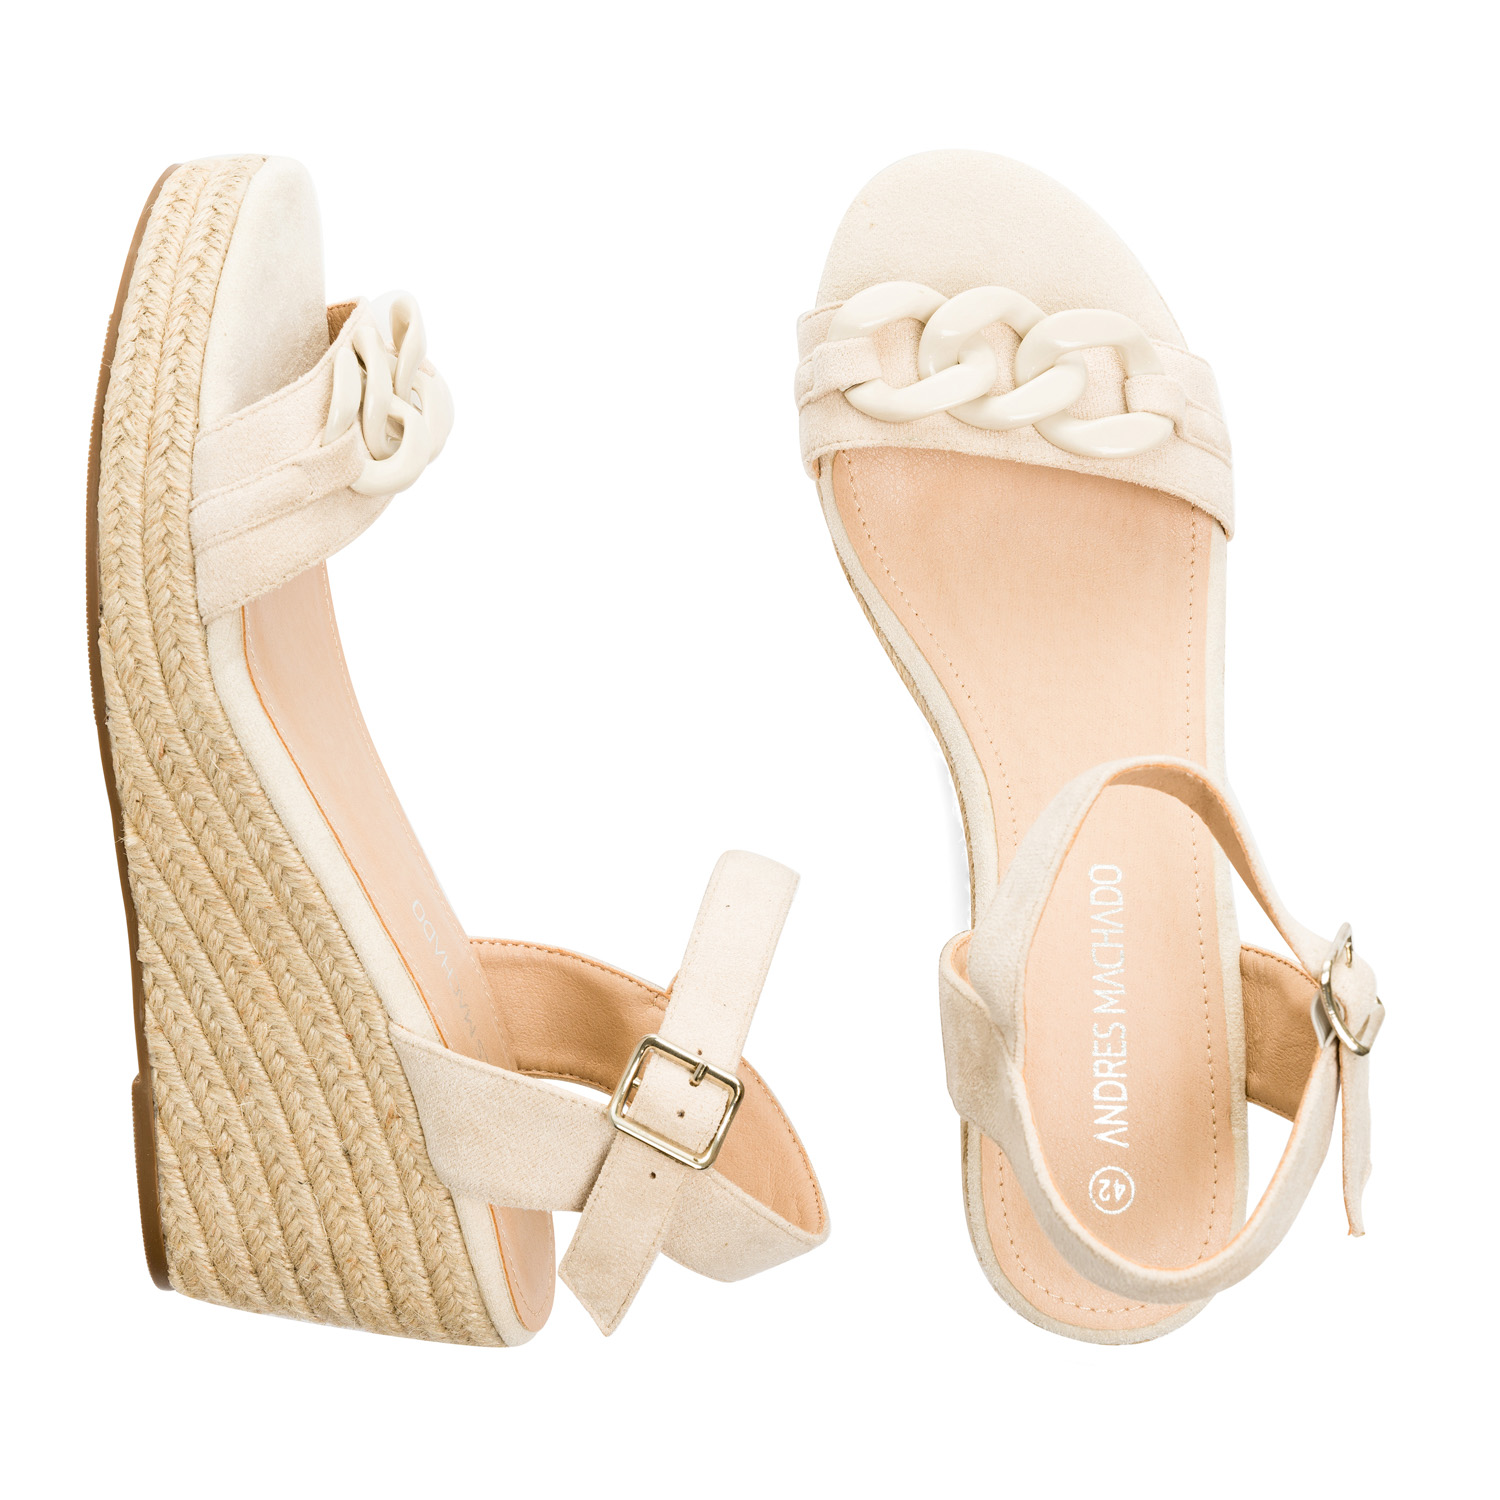 Off-white faux suede espadrilles with jute wedge 